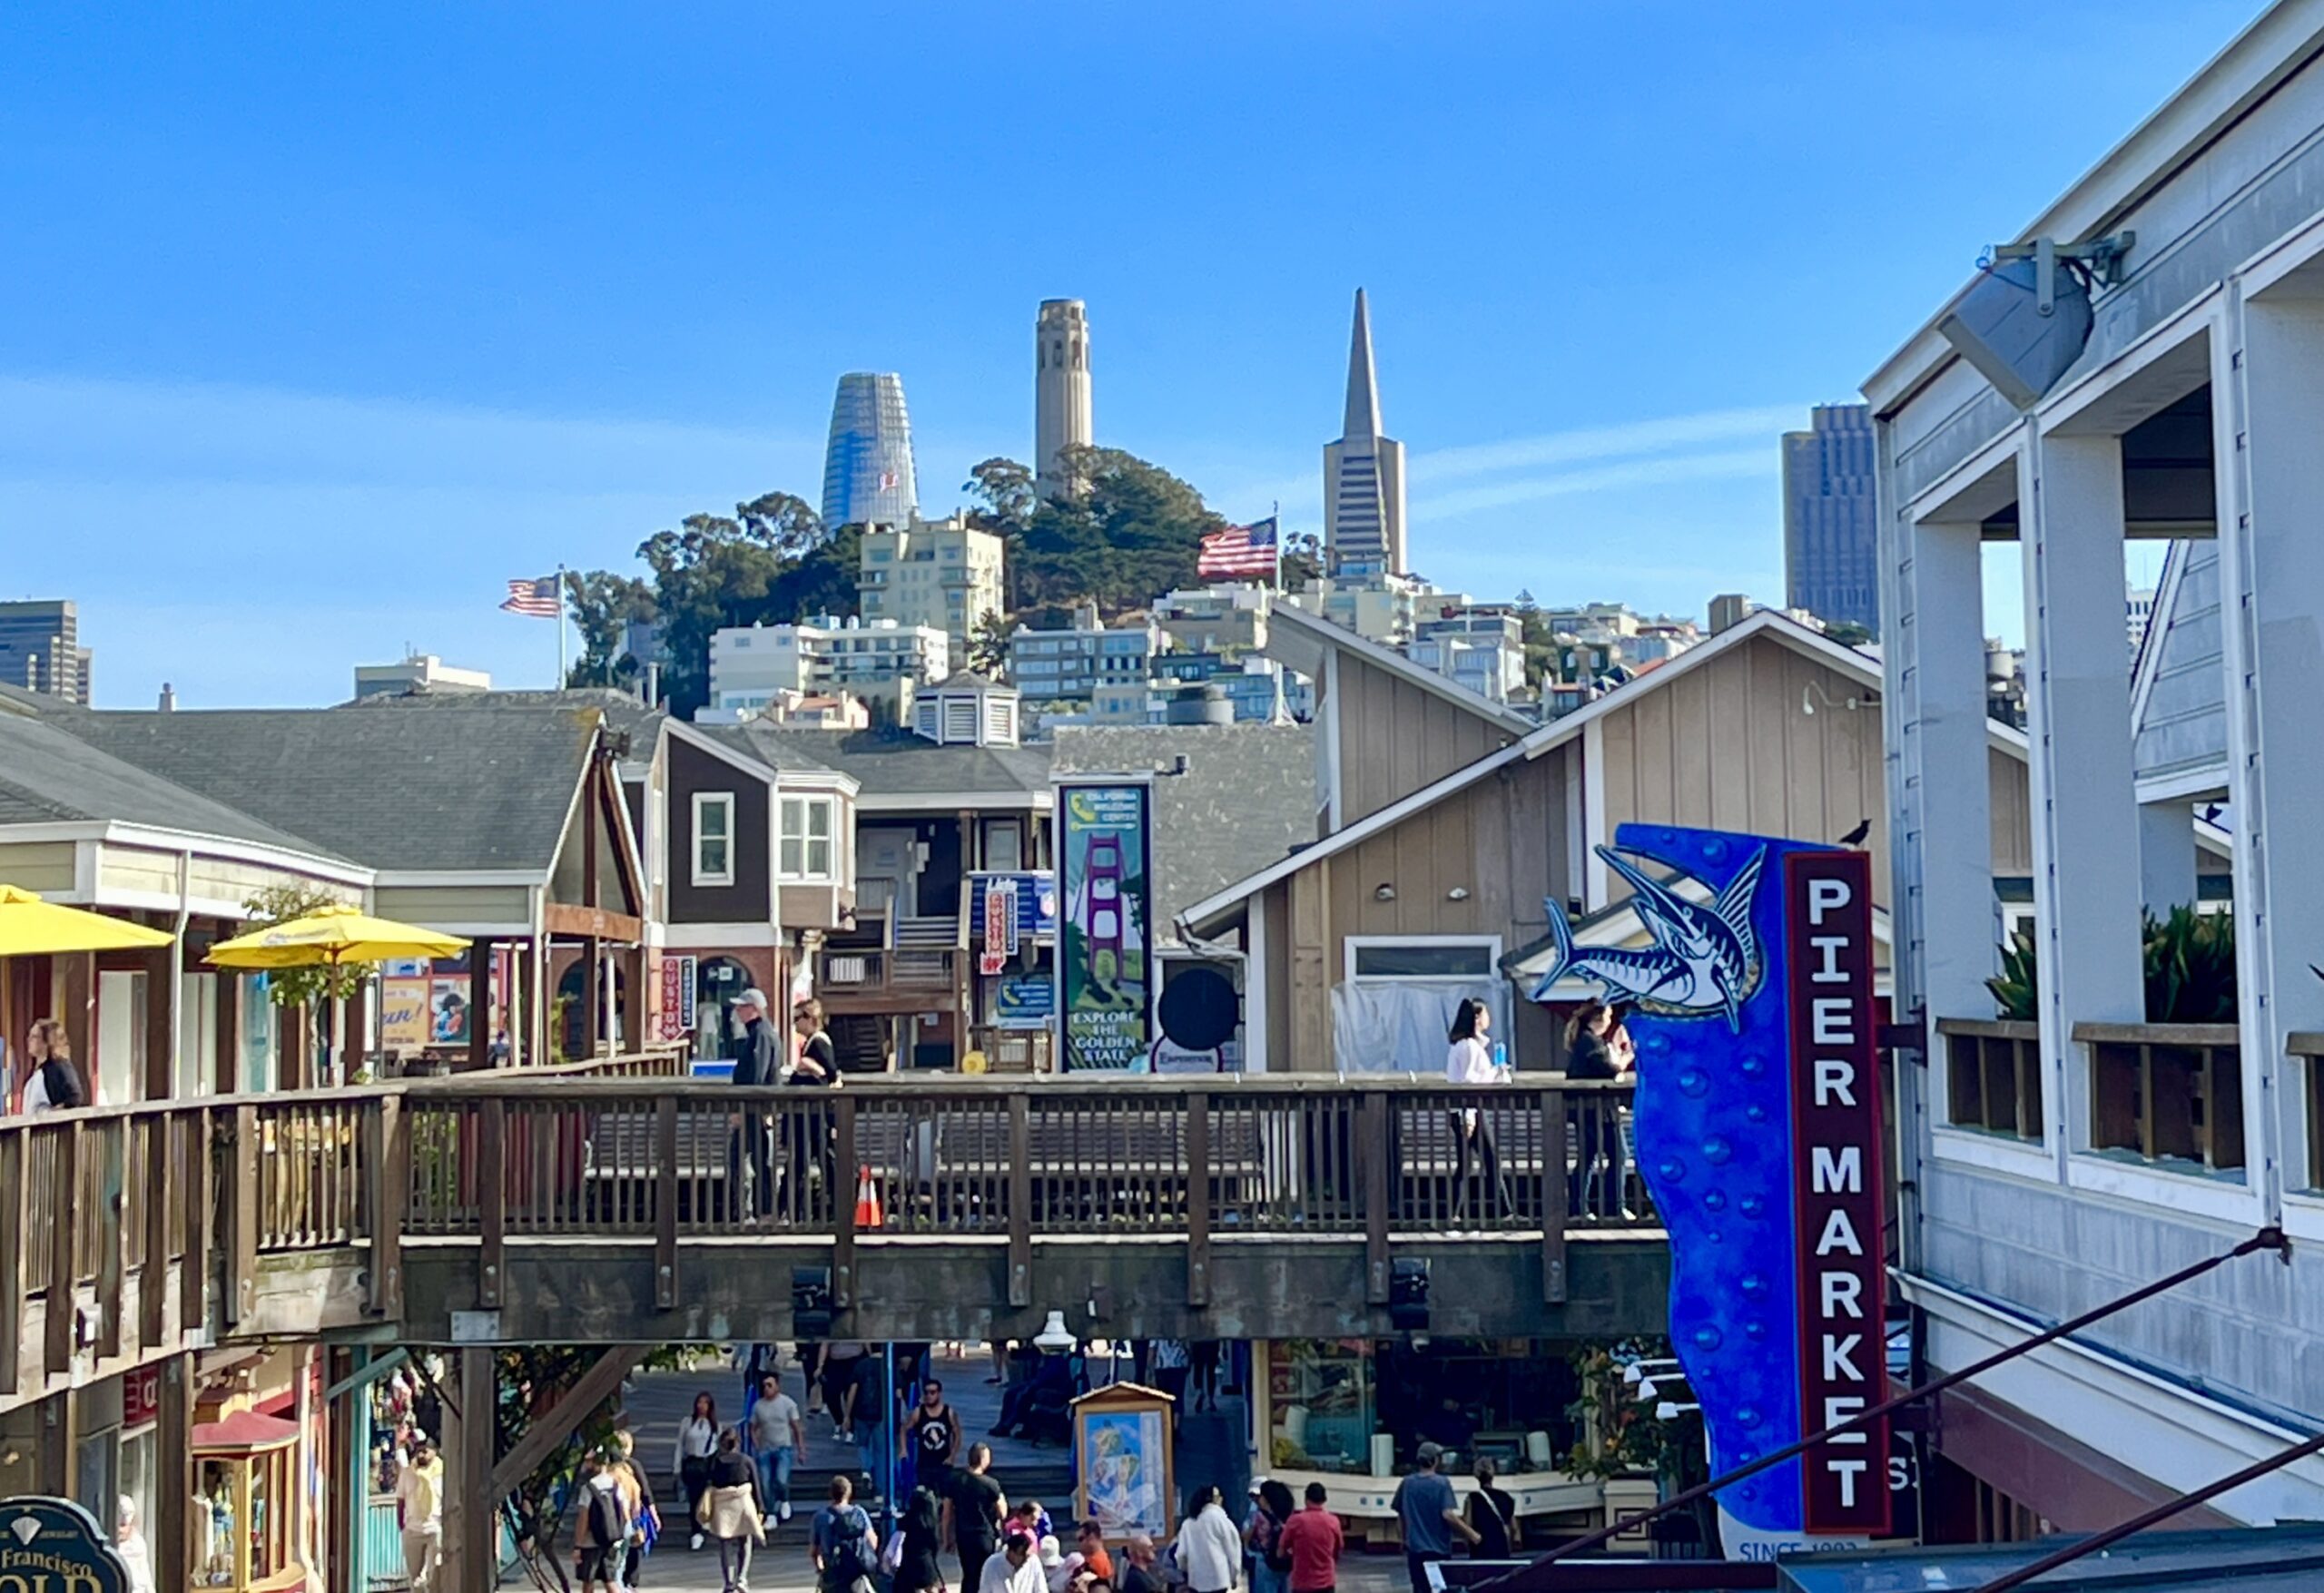 Coit Tower and Pier Market Seafood Restaurant seen from Pier 39